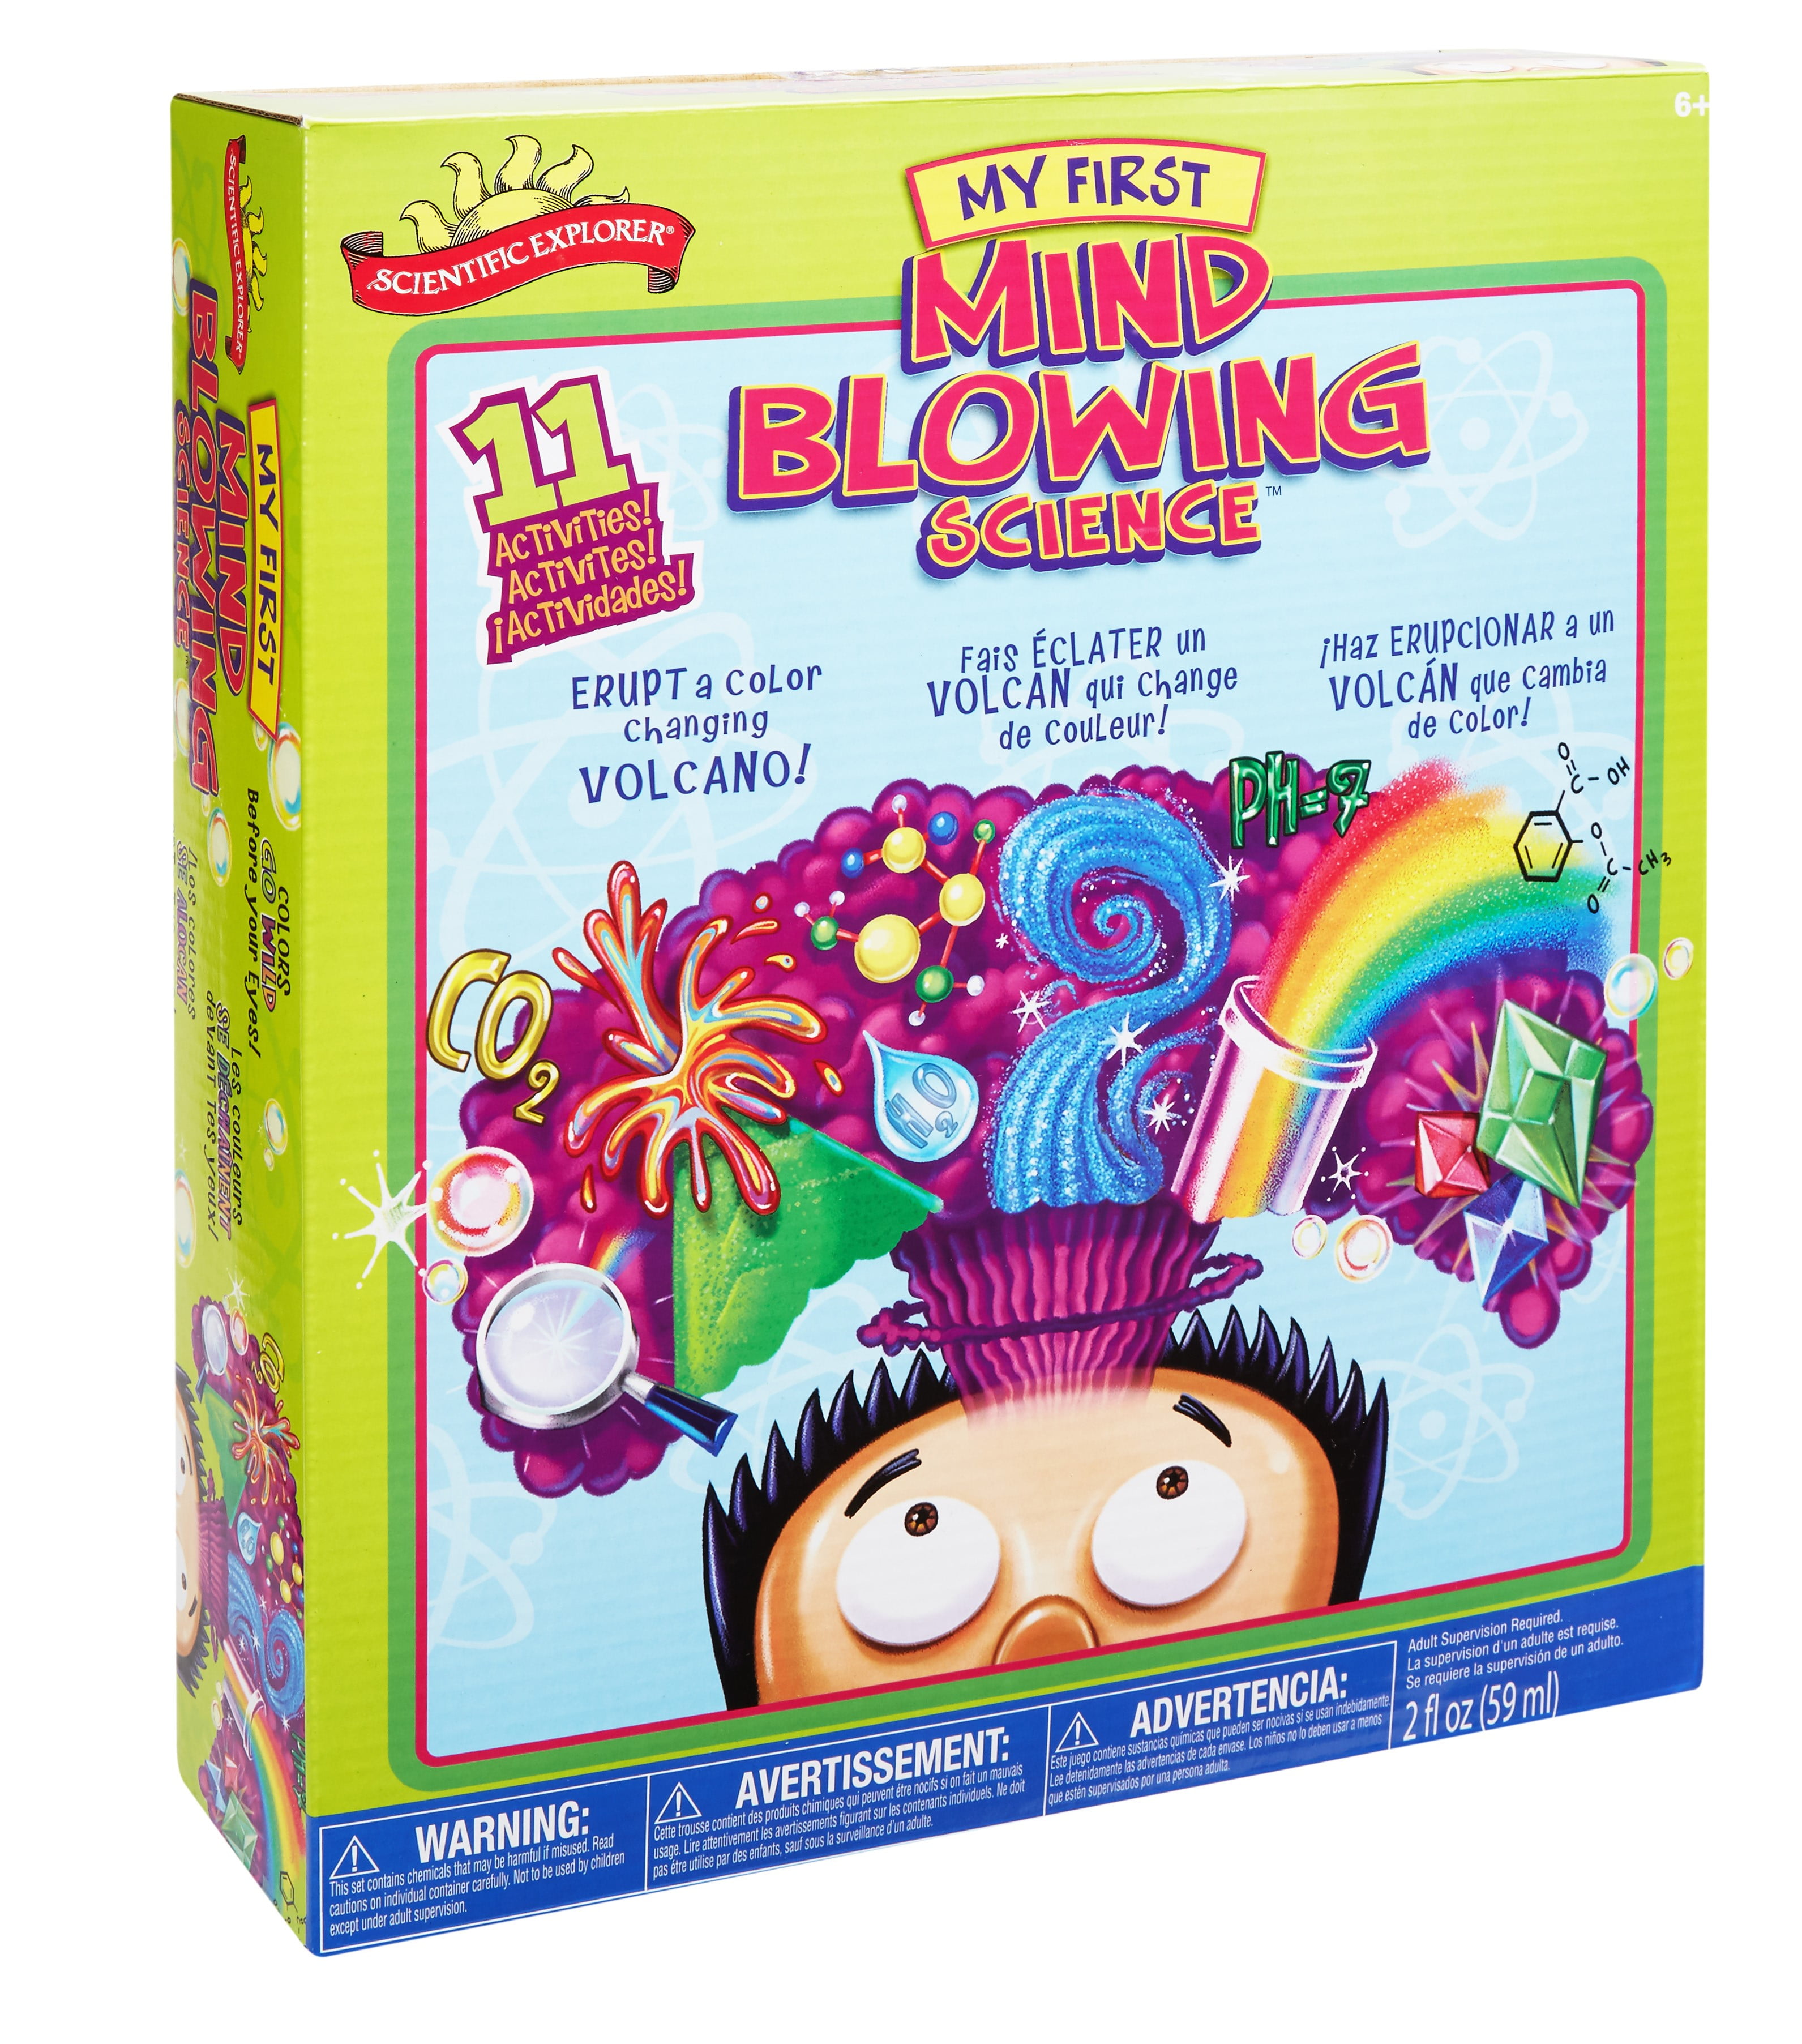 Scientific Explorer My First Mind Blowing Science Experiment Kit, 11 Mind  Blowing Science Activities and Experiments (Ages 6+)